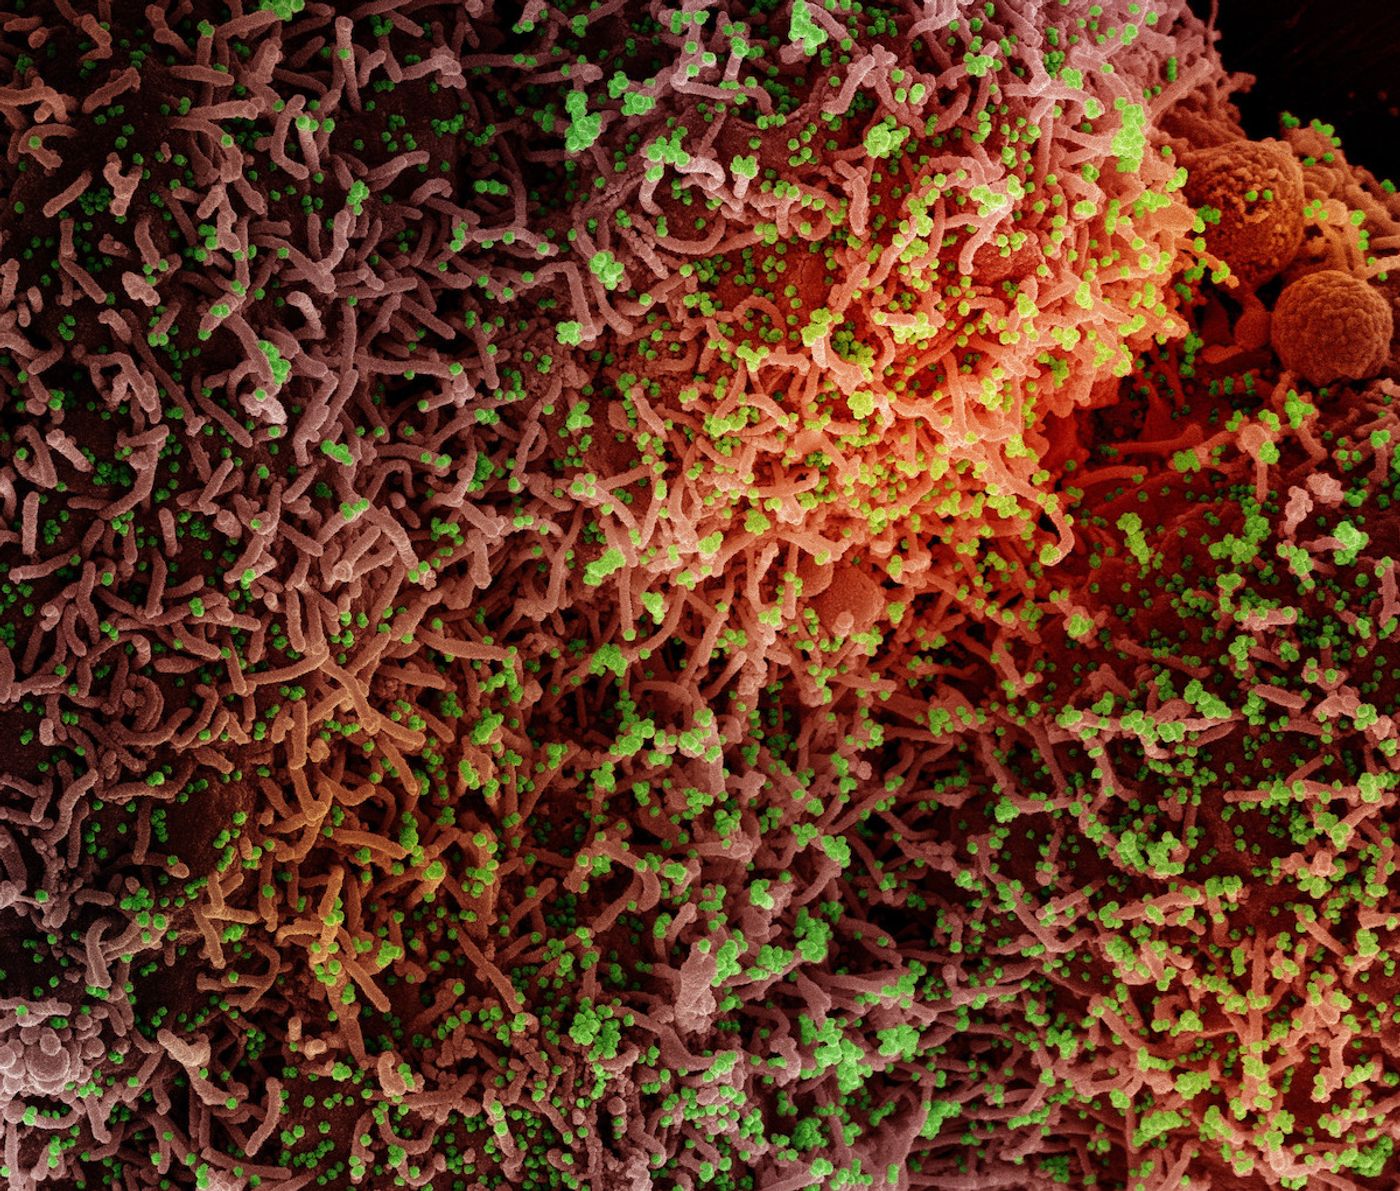 Colorized scanning electron micrograph of a cell infected with a variant strain of SARS-CoV-2 virus particles (green), isolated from a patient sample. Image captured at the NIAID Integrated Research Facility (IRF) in Fort Detrick, Maryland. Credit: NIAID